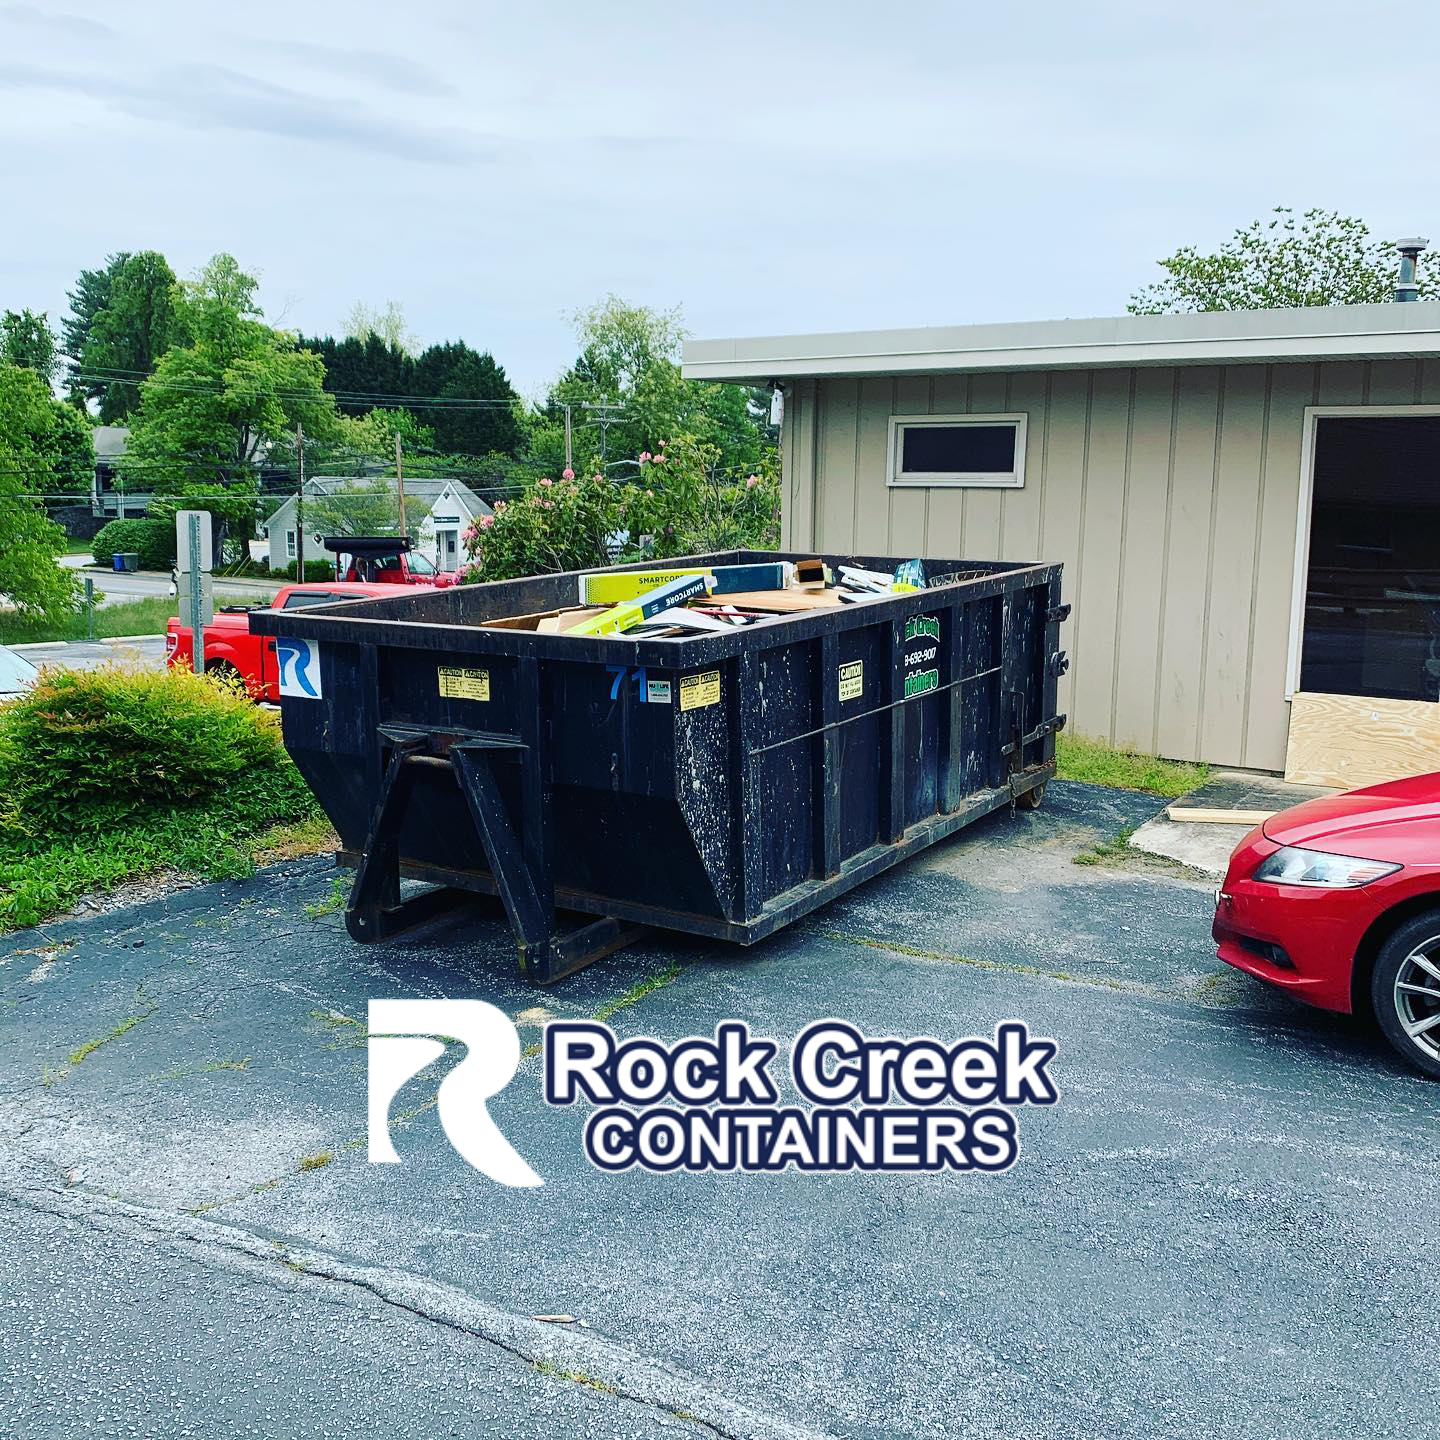 Snohomish County Dumpster Bags & Junk Removal – North Seattle's most  convenient and affordable dumpster rental alternative